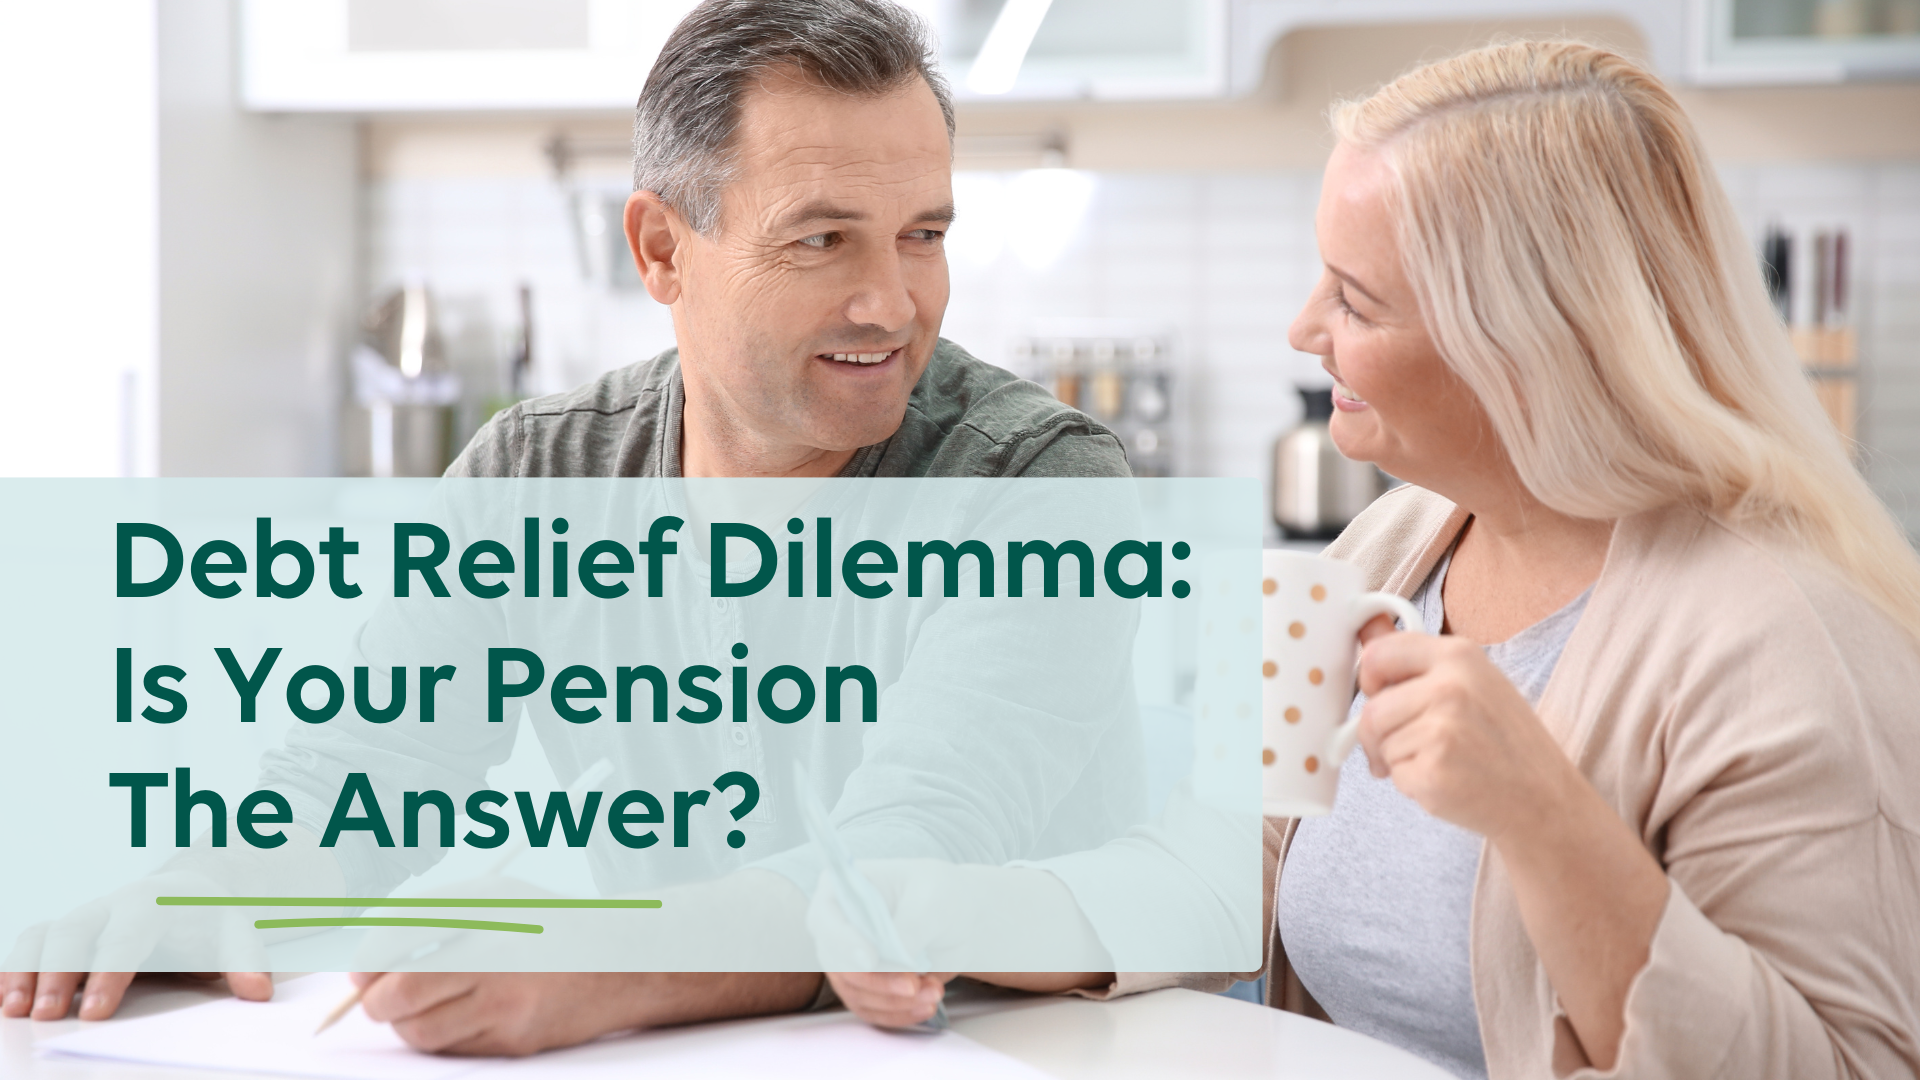 Debt Relief Dilemma: Is Your Pension the Answer?